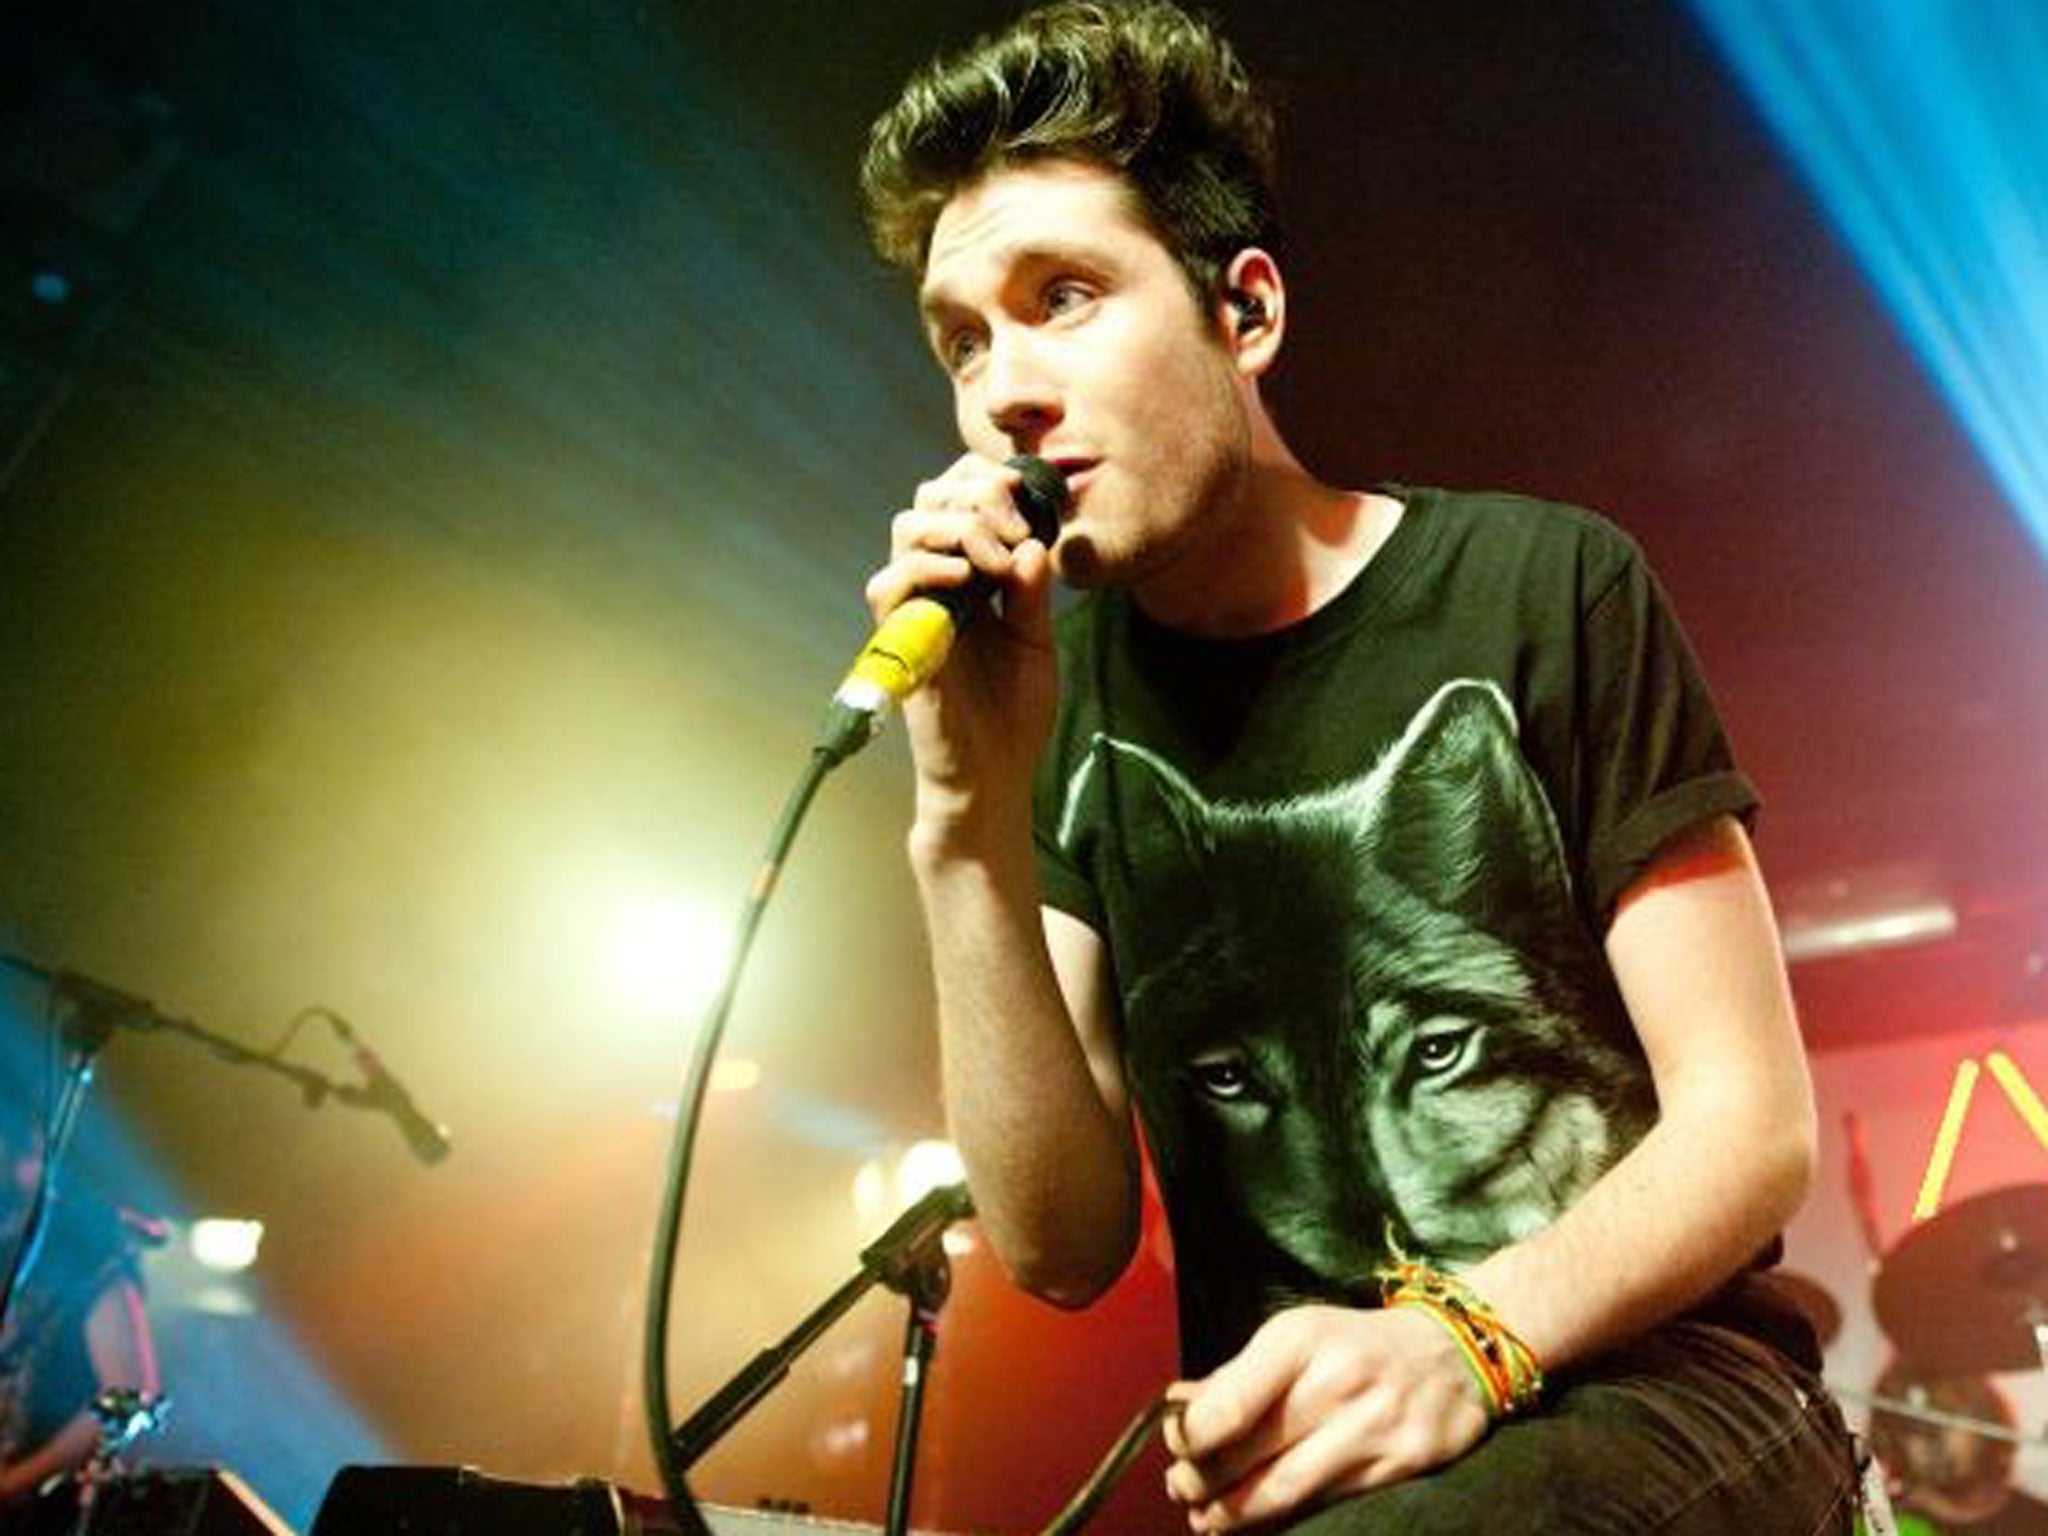 Dan Smith of British band Bastille, who are hotly rumoured for an unscheduled performance at Glastonbury